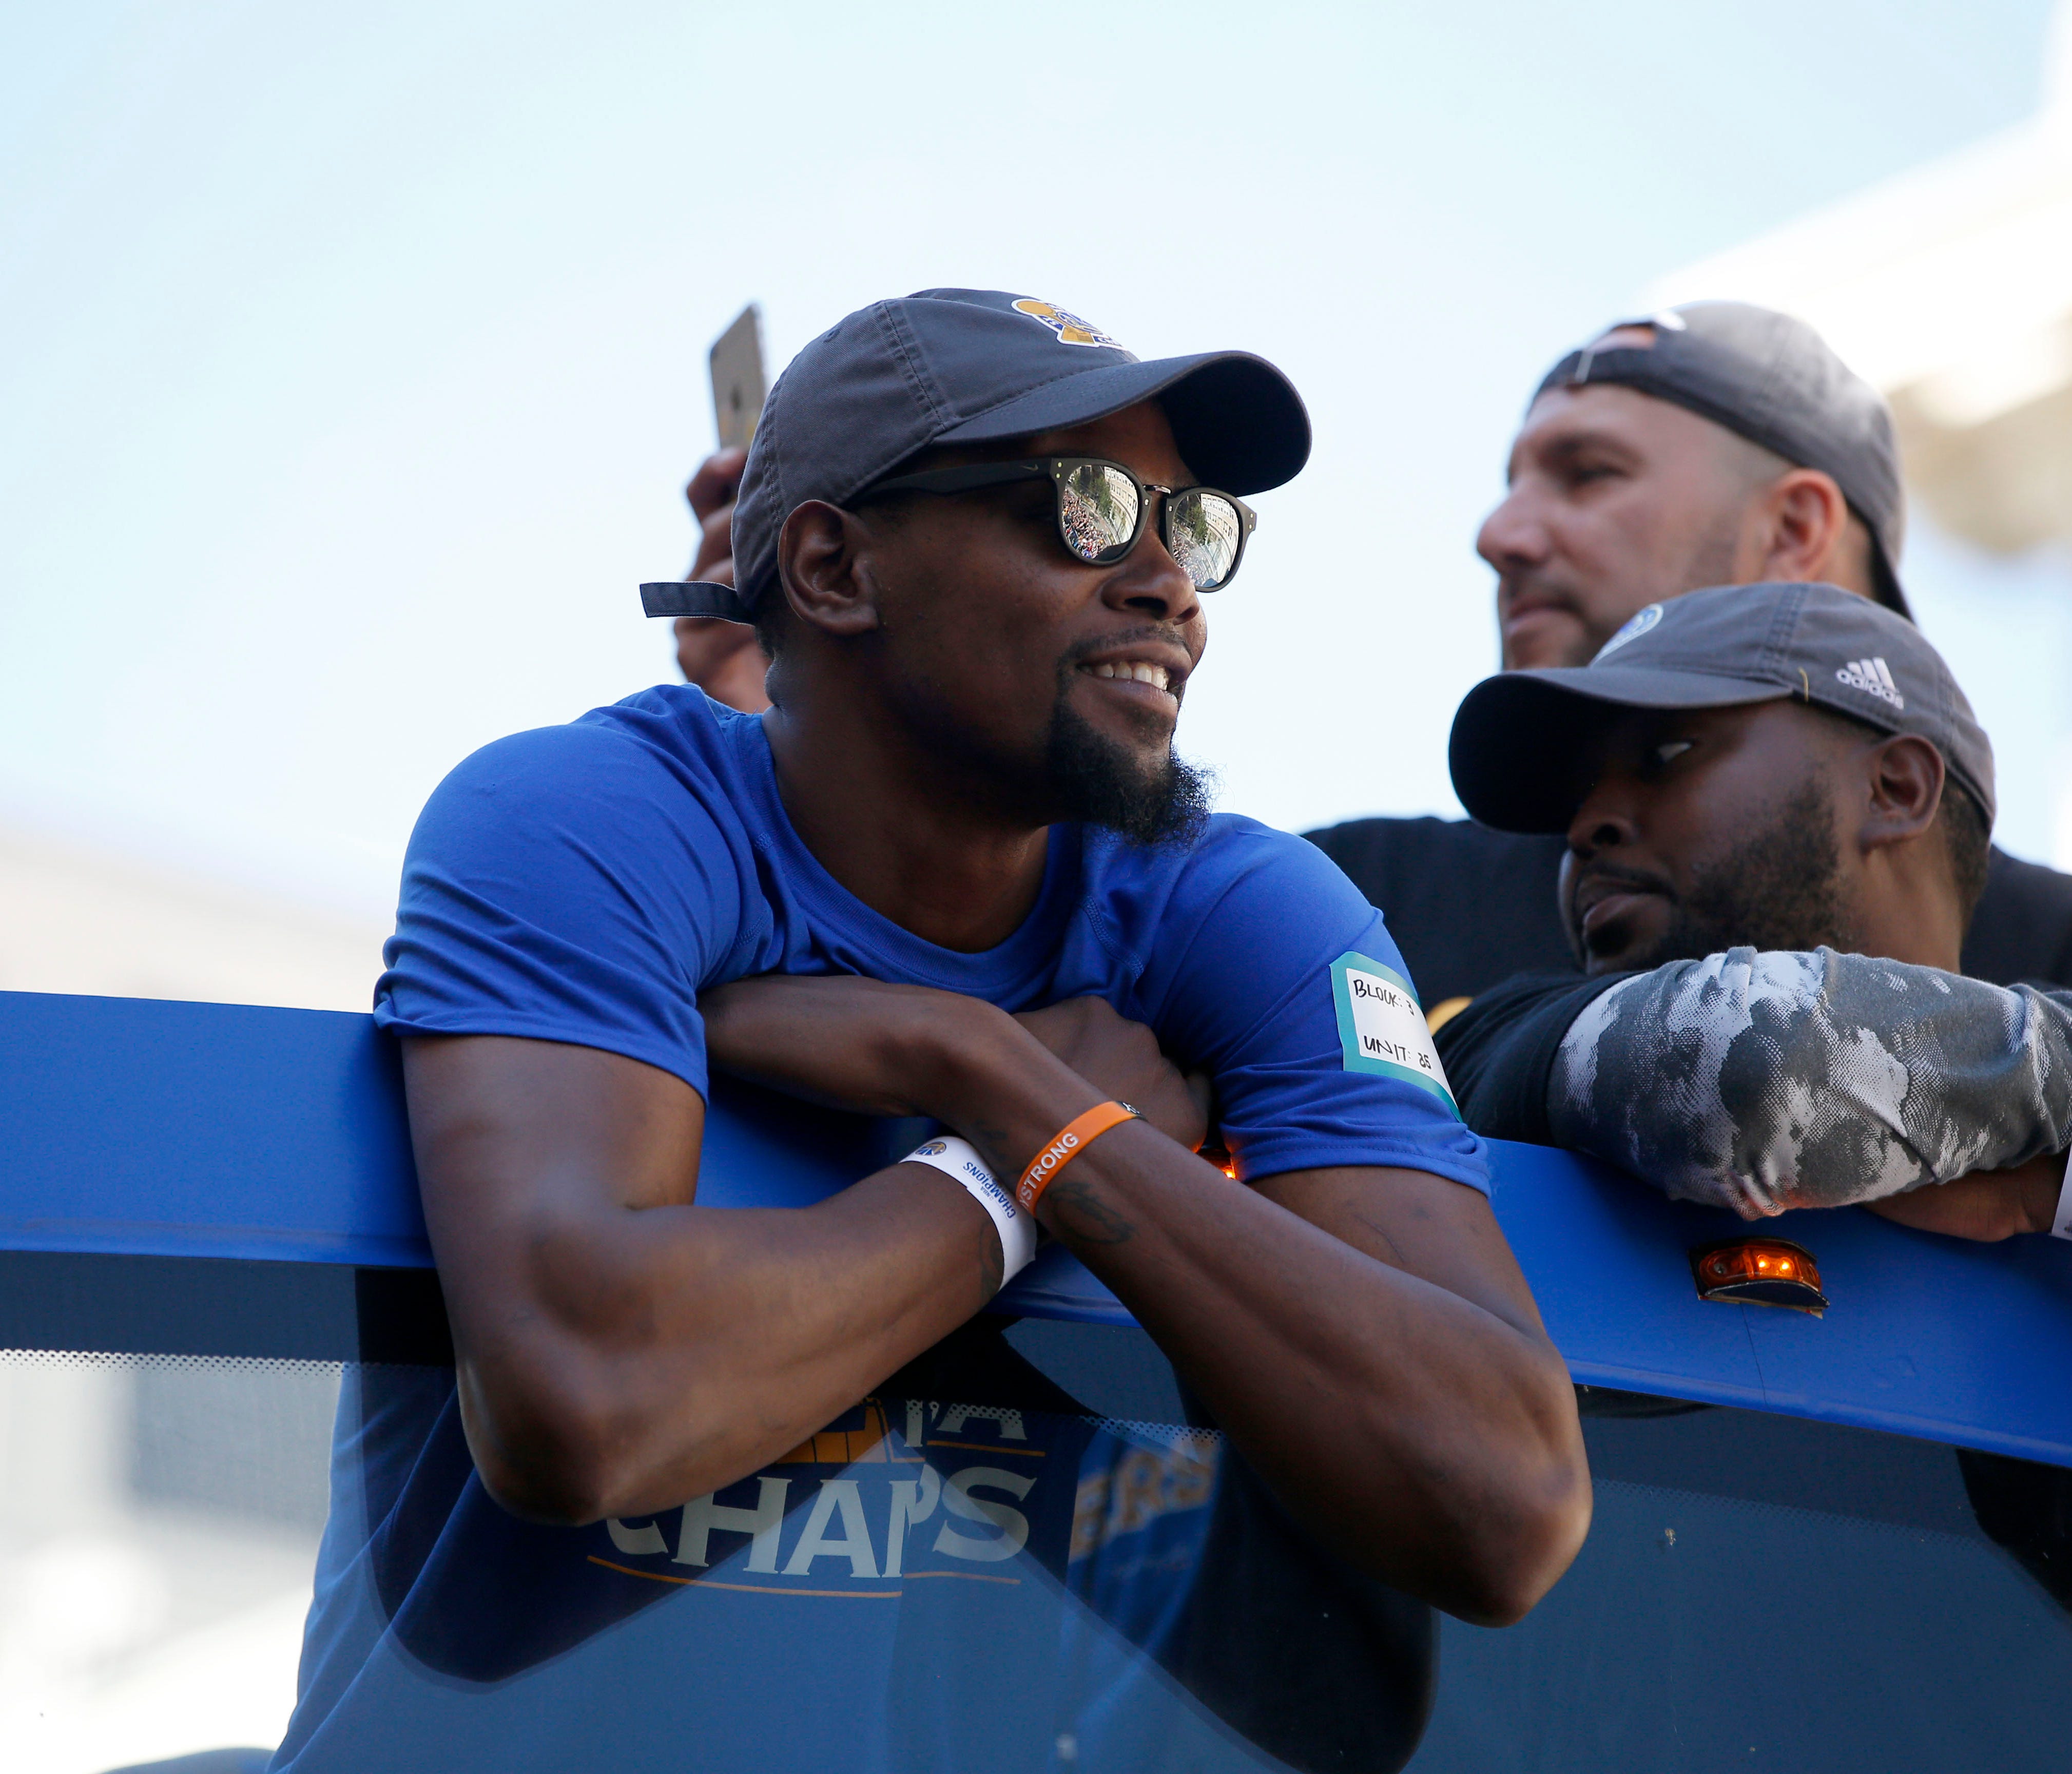 Jun 15, 2017; Oakland, CA, USA; Golden State Warriors forward Kevin Durant smiles during the Warriors 2017 championship victory parade in downtown Oakland. Mandatory Credit: Cary Edmondson-USA TODAY Sports ORG XMIT: USATSI-360408 ORIG FILE ID:  20170